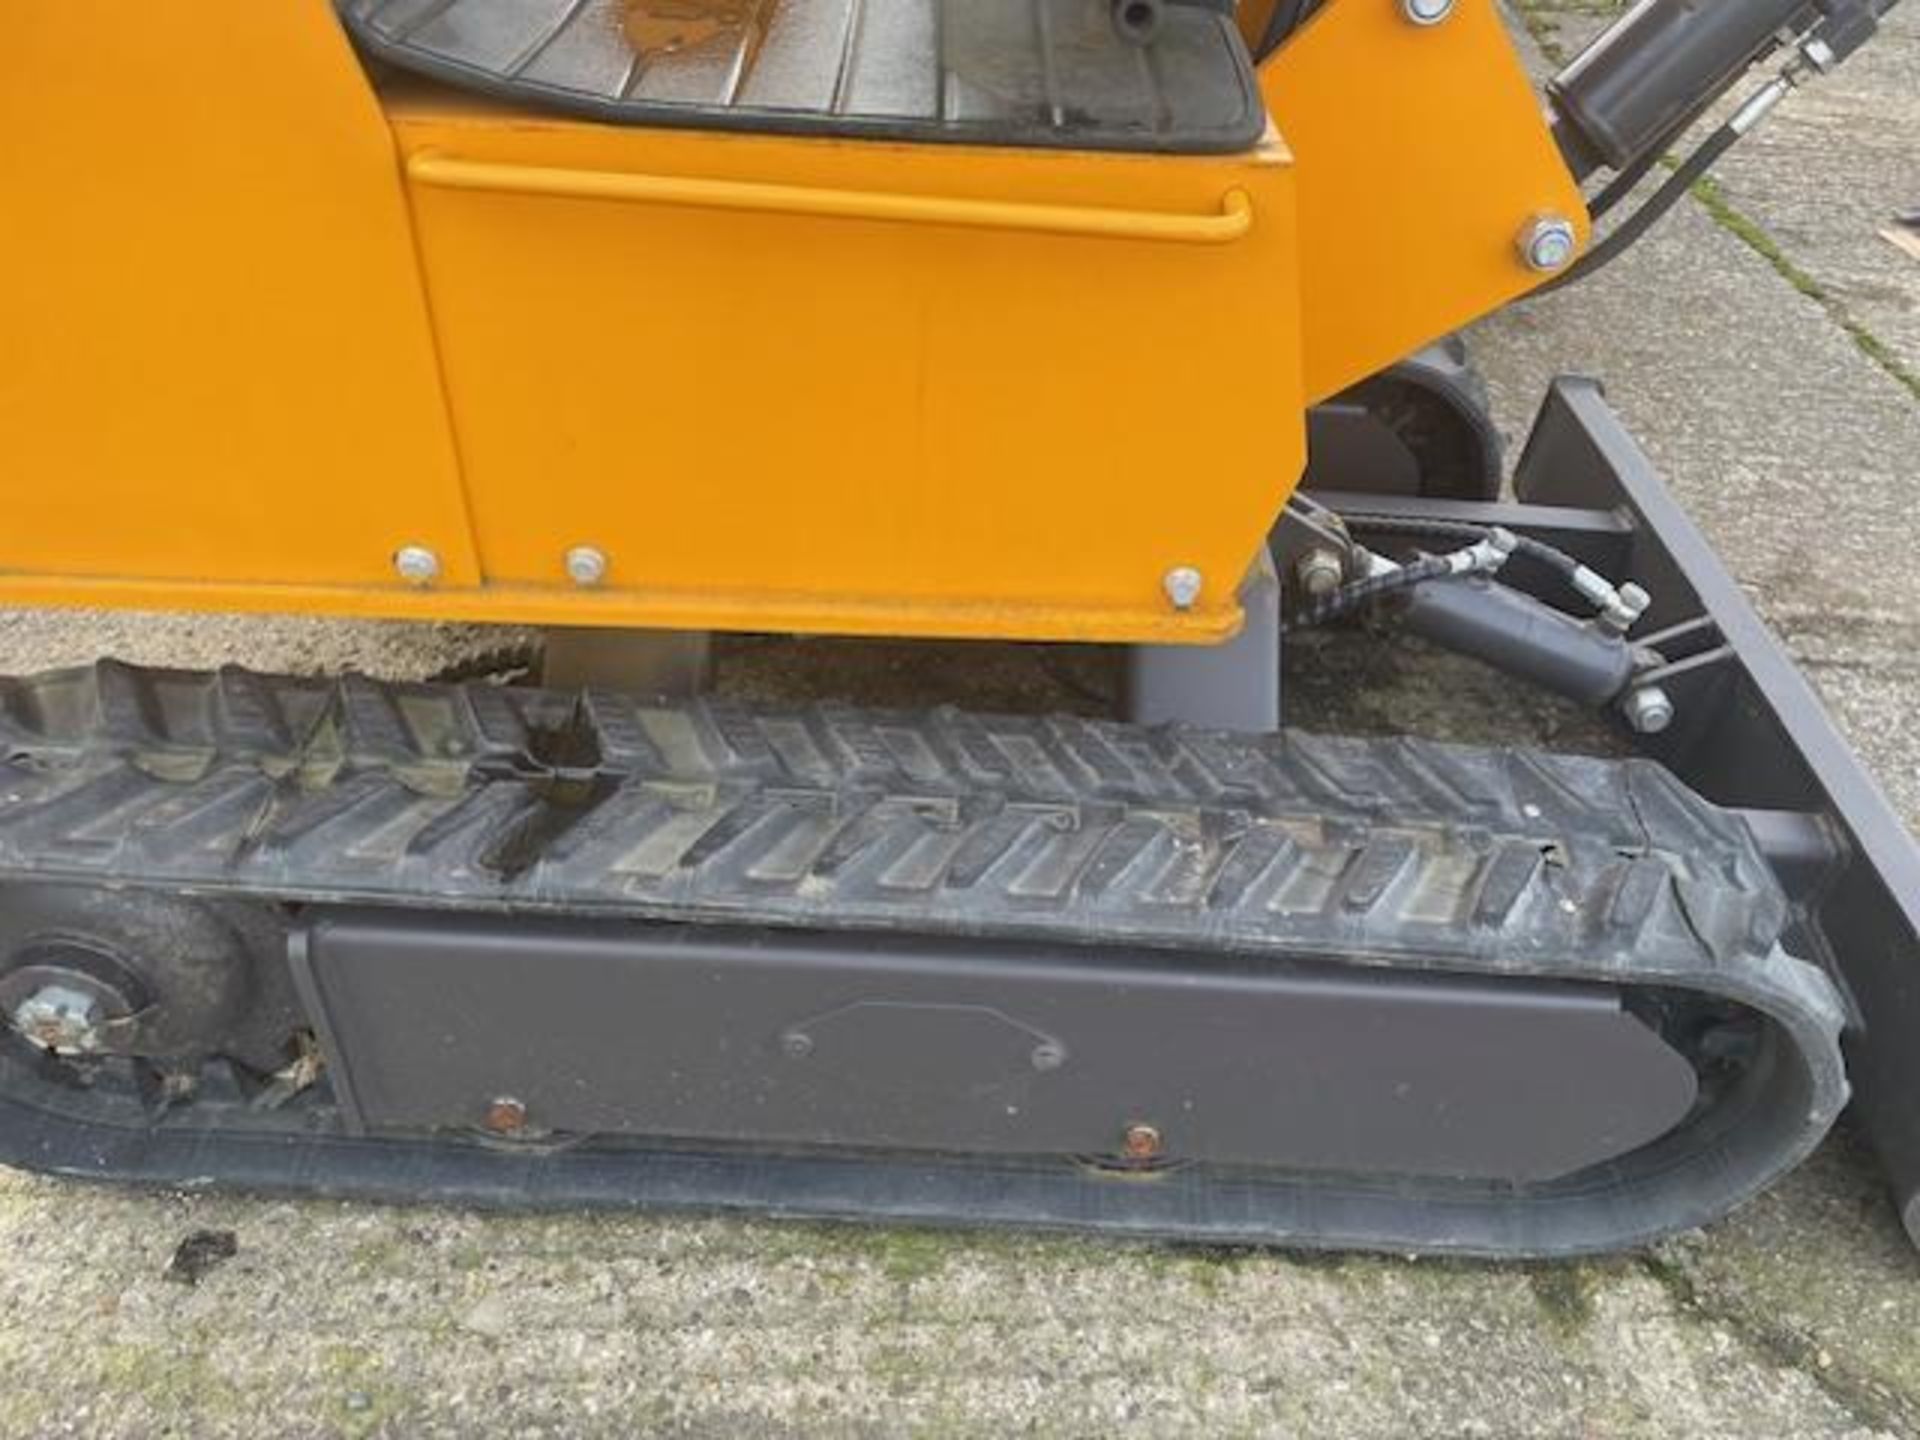 NEW UNISSUED XN10 RUBBER TRACKED MINI EXCAVATOR DIESEL ENGINE PIPED FOR HAMMER FRONT BLADE ETC - Image 7 of 8